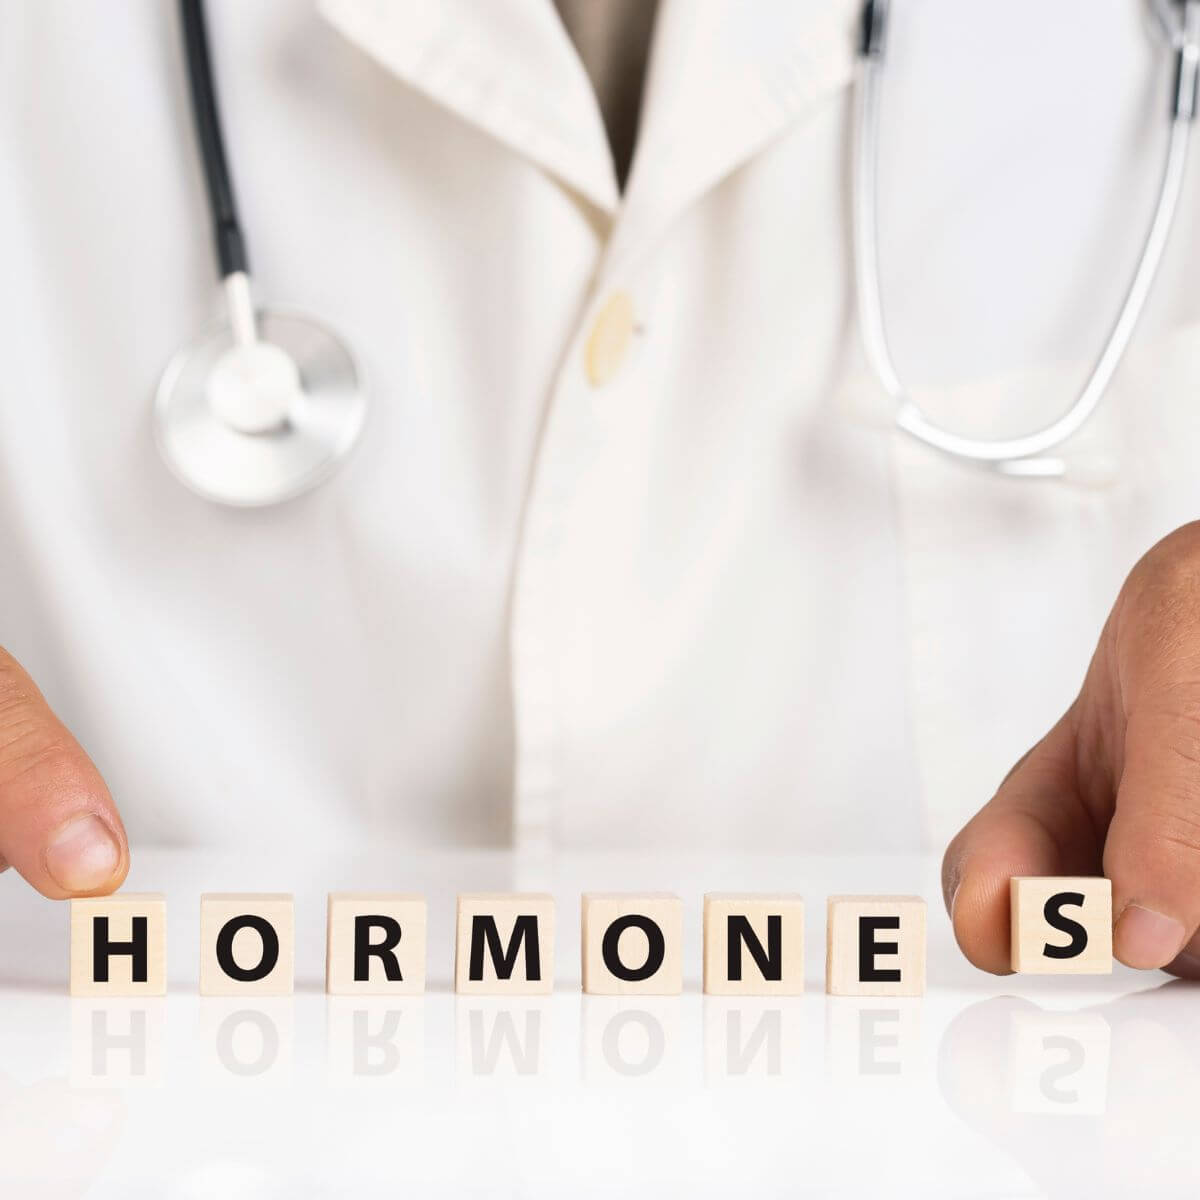 5 Signs & Symptoms You May Have Female Hormone Imbalances